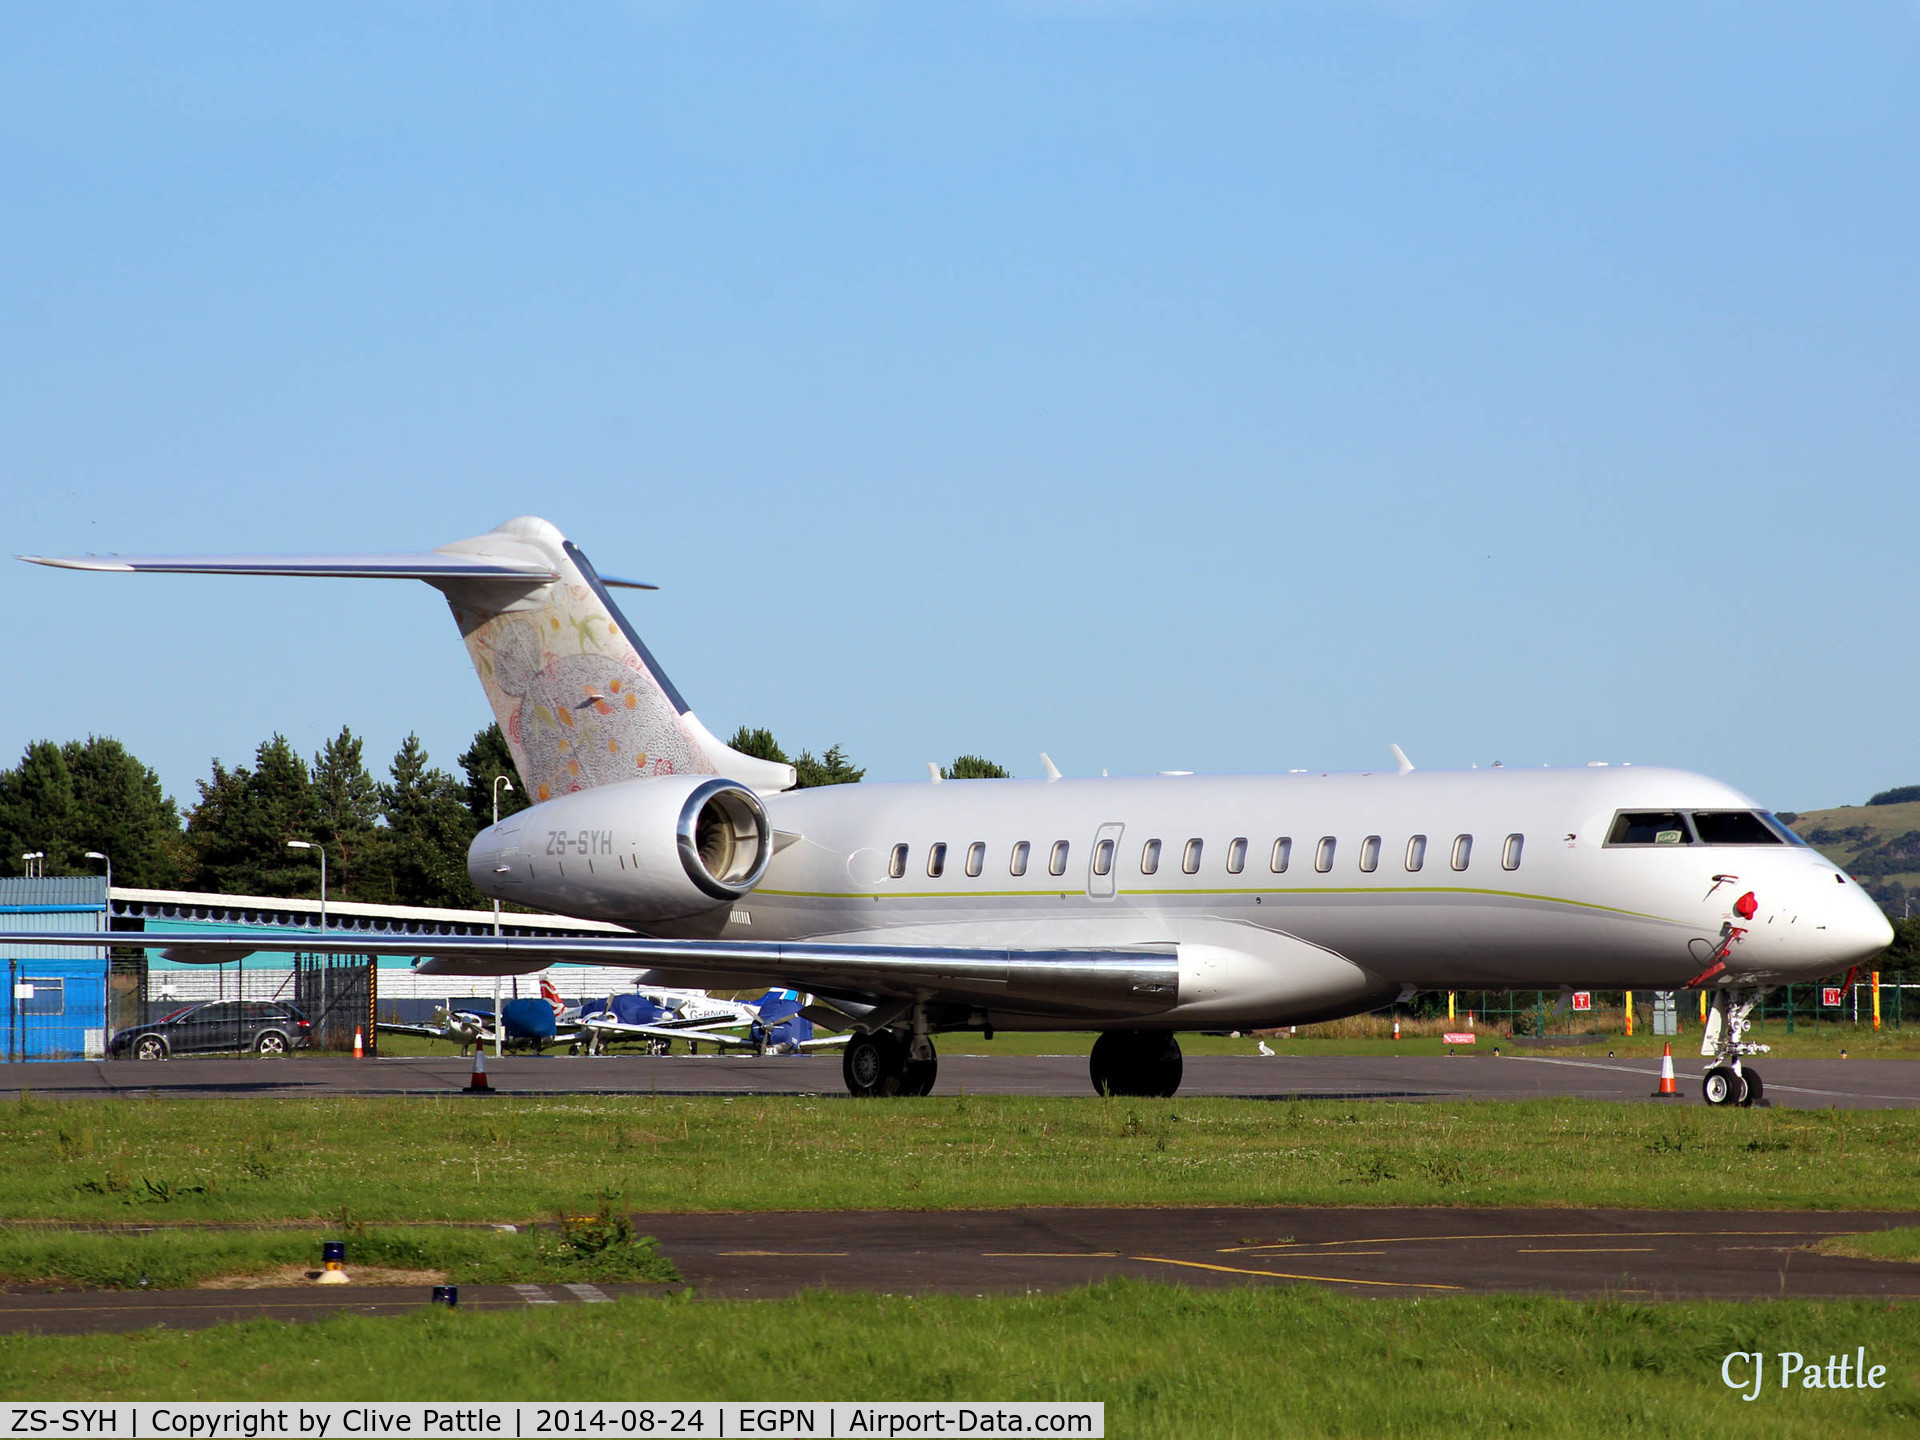 ZS-SYH, 2012 Bombardier BD-700-1A11 Global 6000 C/N 9470, Pictured on the ramp at Dundee Riverside EGPN on the evening of Sunday 24th August 2014 for an overnight stop.